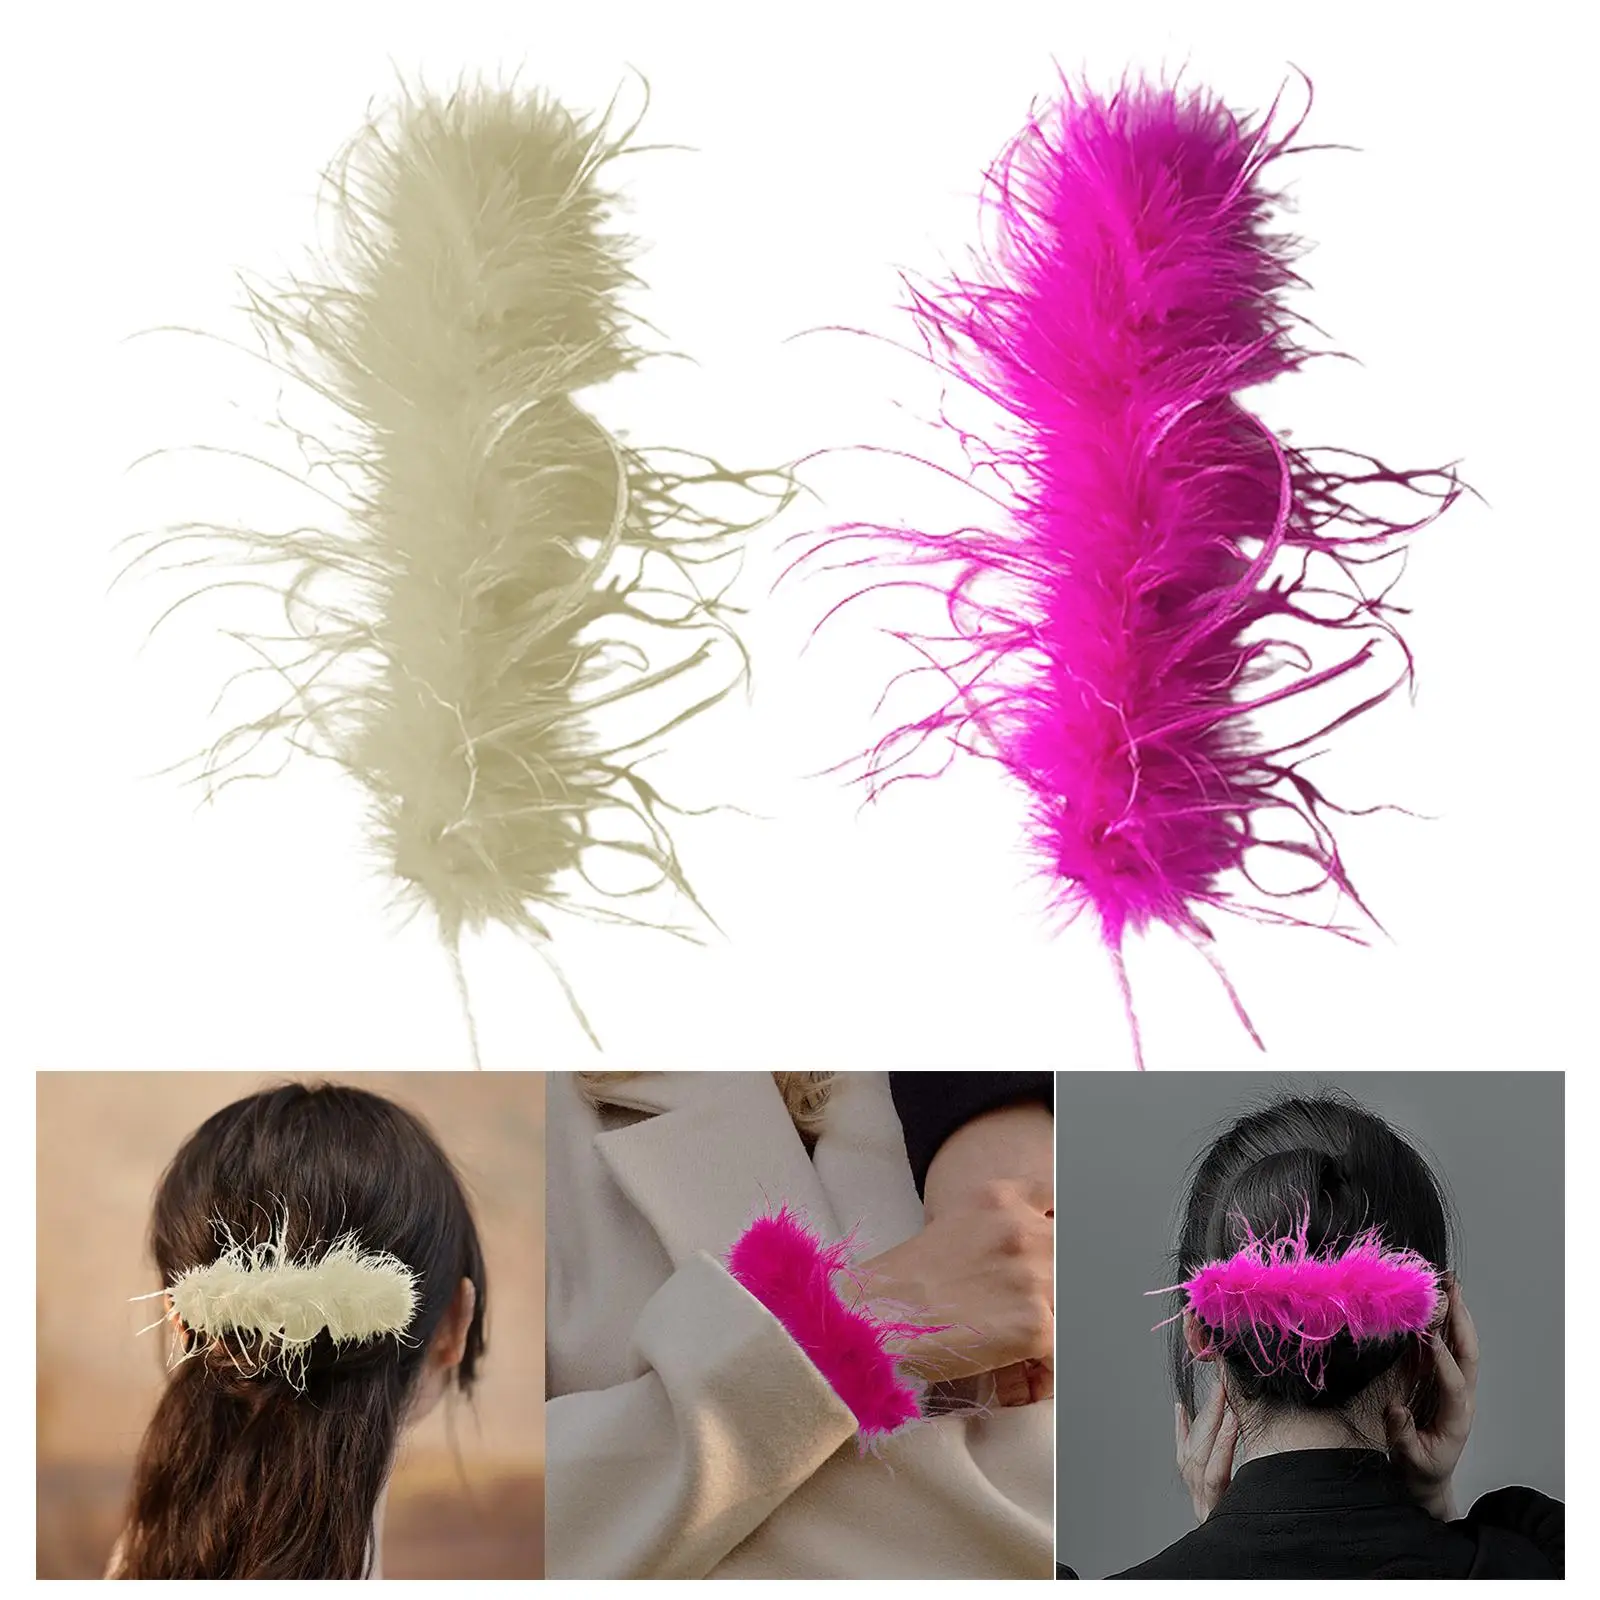 Feather Slap Bracelets Cuffs Bracelet Decoration Wrist Sleeve Patting Wristband Hair Band for Party New Year Kids Teens Adult